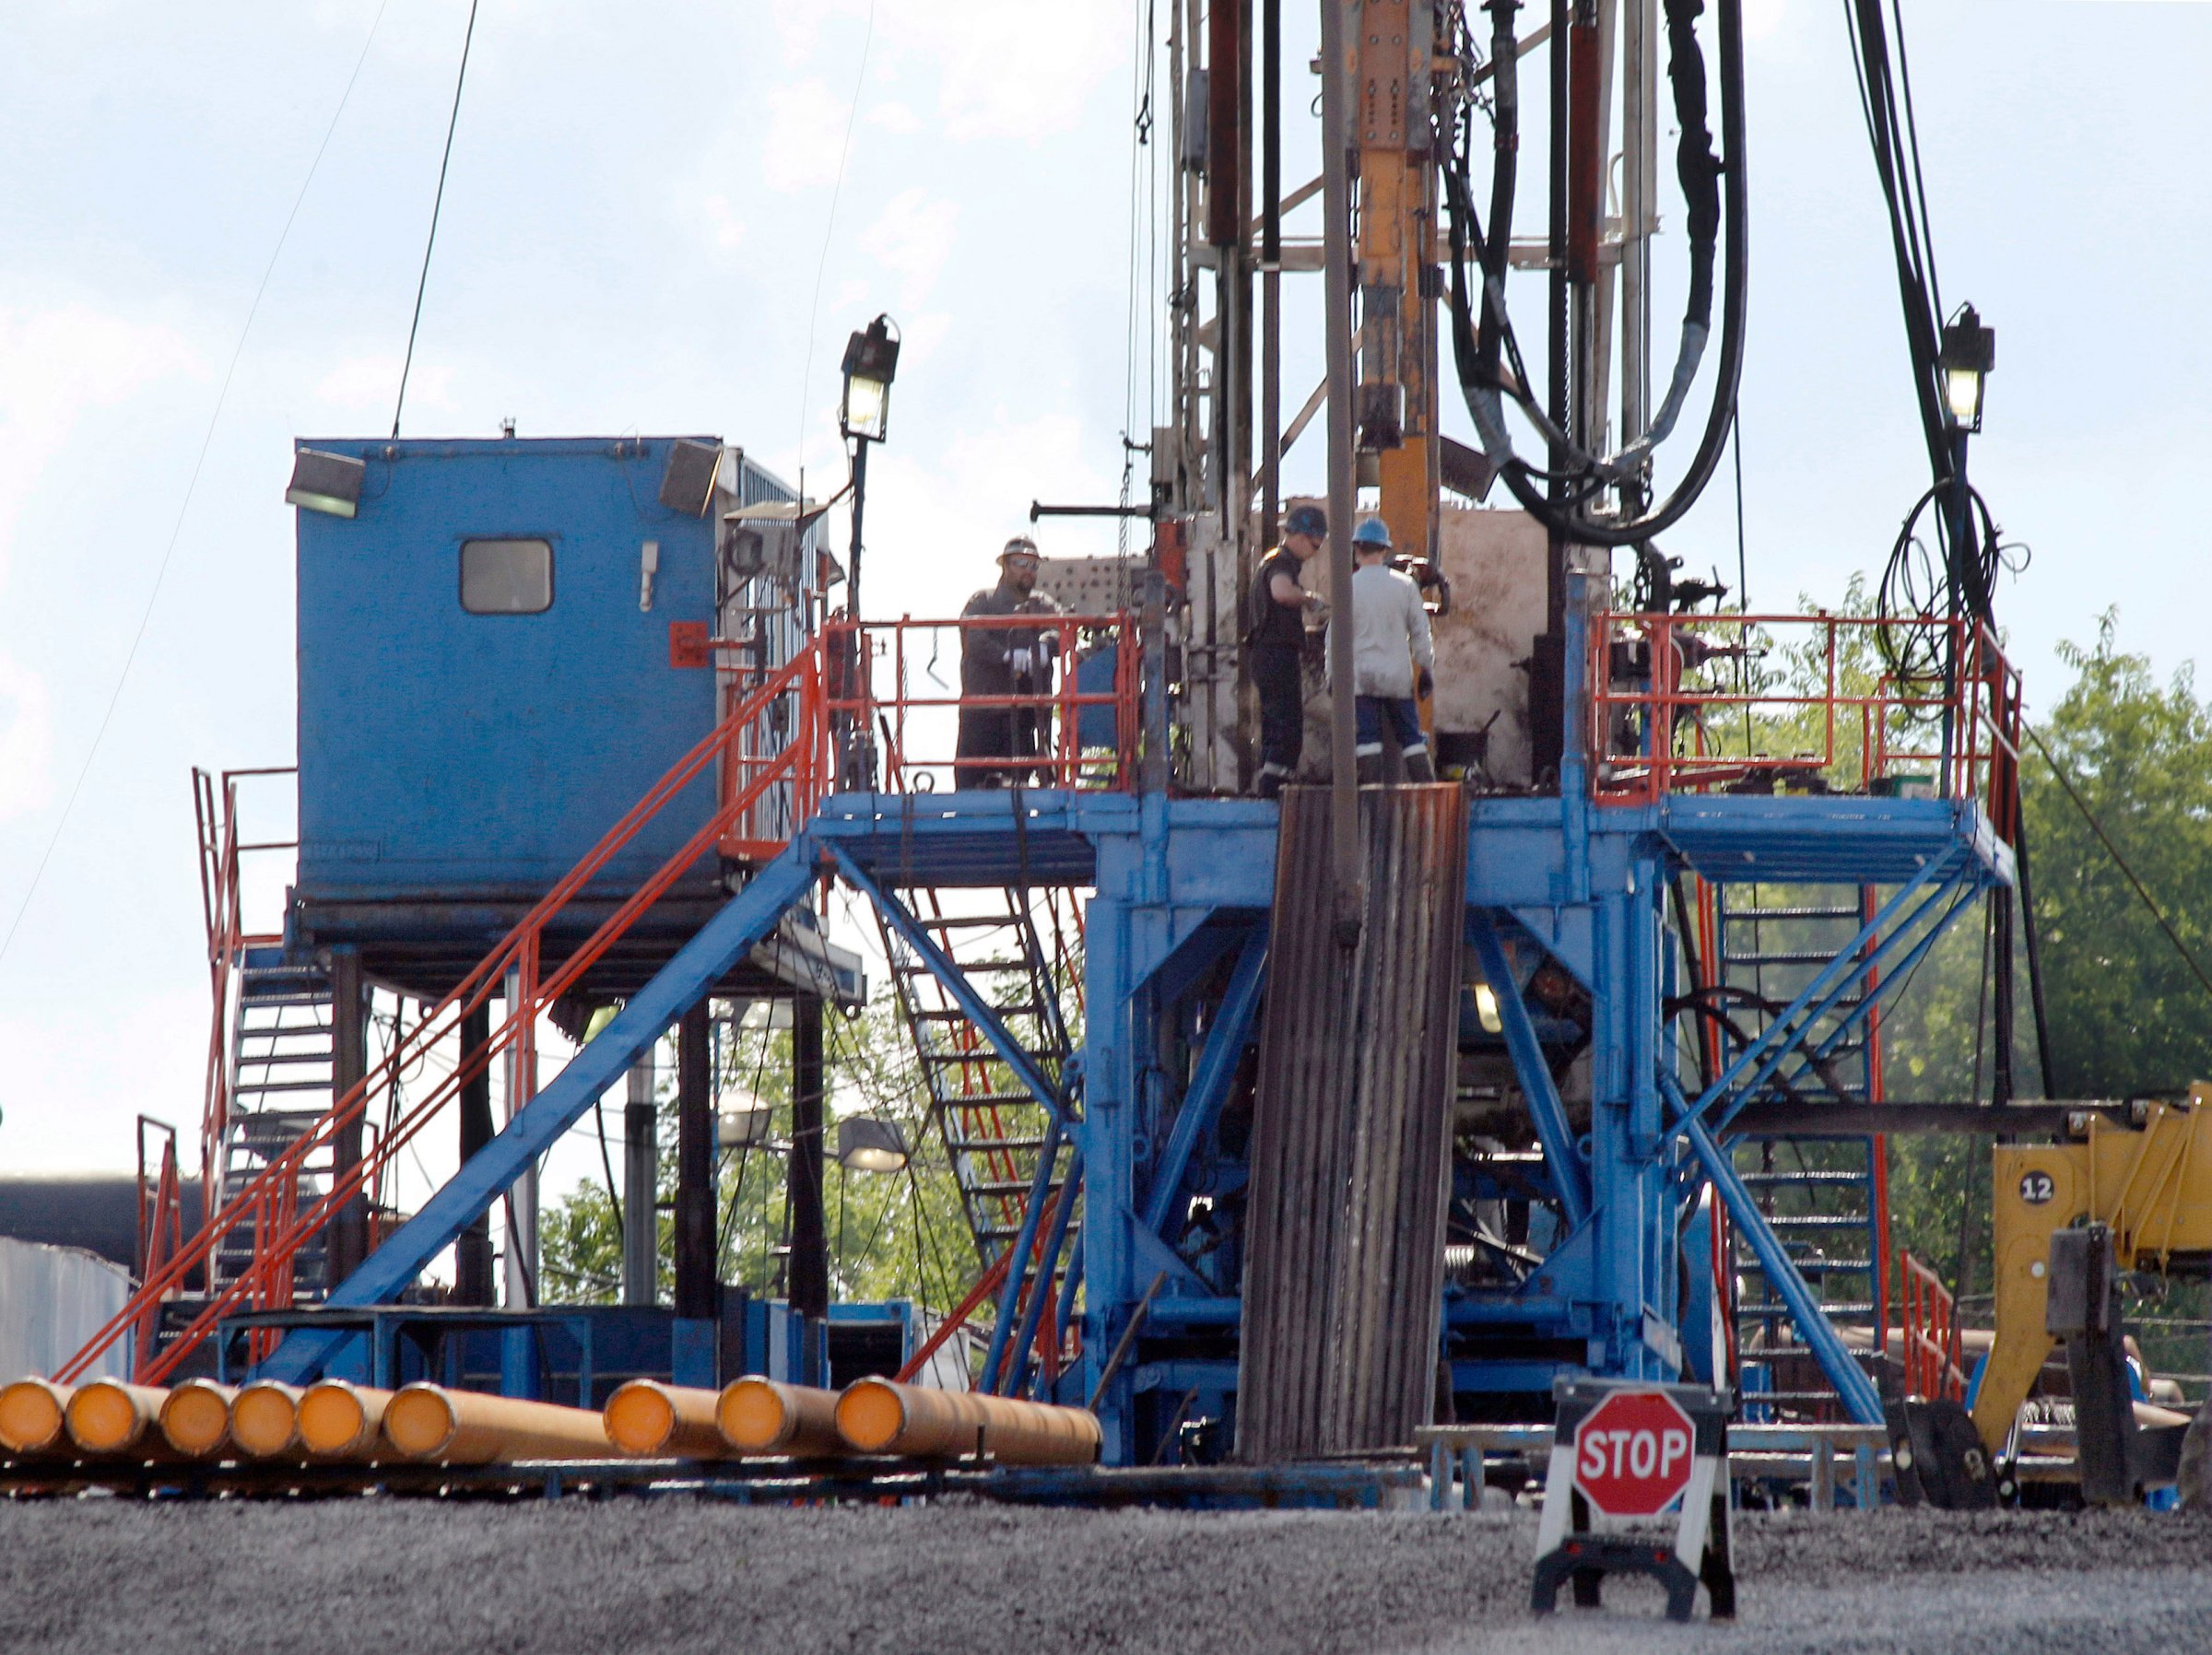 A crew works on a gas drilling rig at a well site for shale based natural gas in Zelienople, Pa on Feb. 28. 2013.